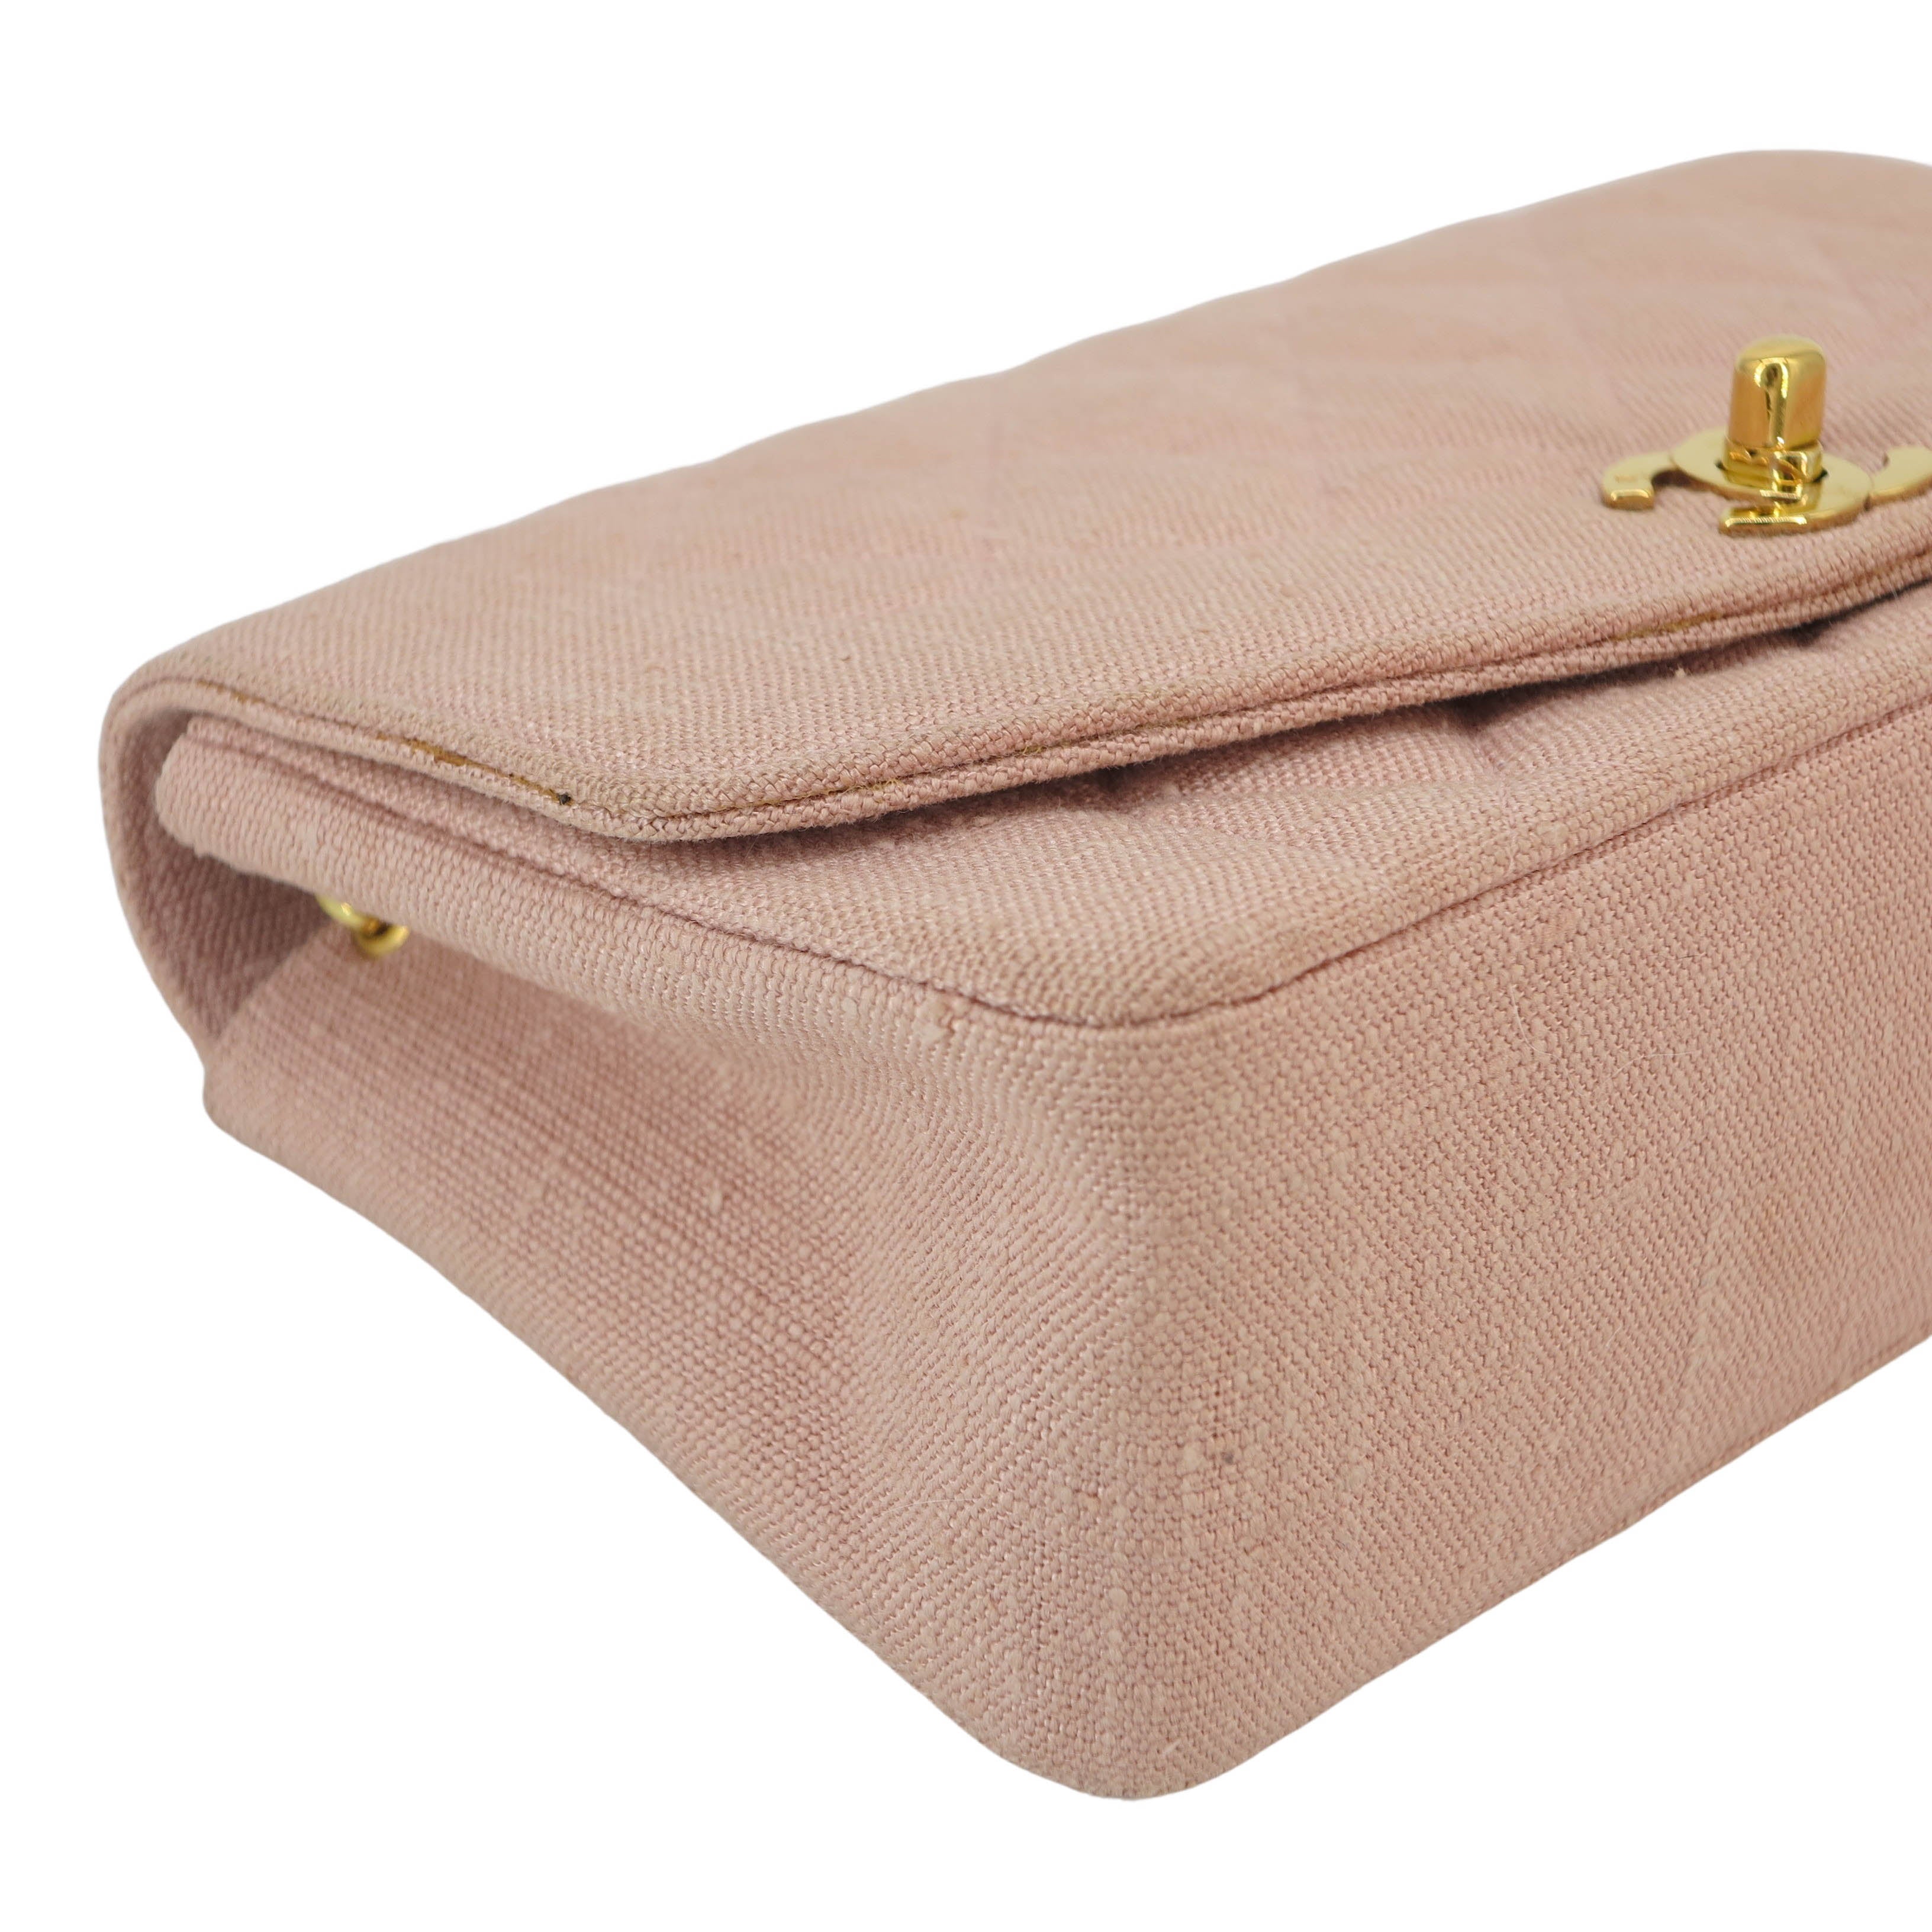 Vintage Small Diana Flap Bag in Pink Linen